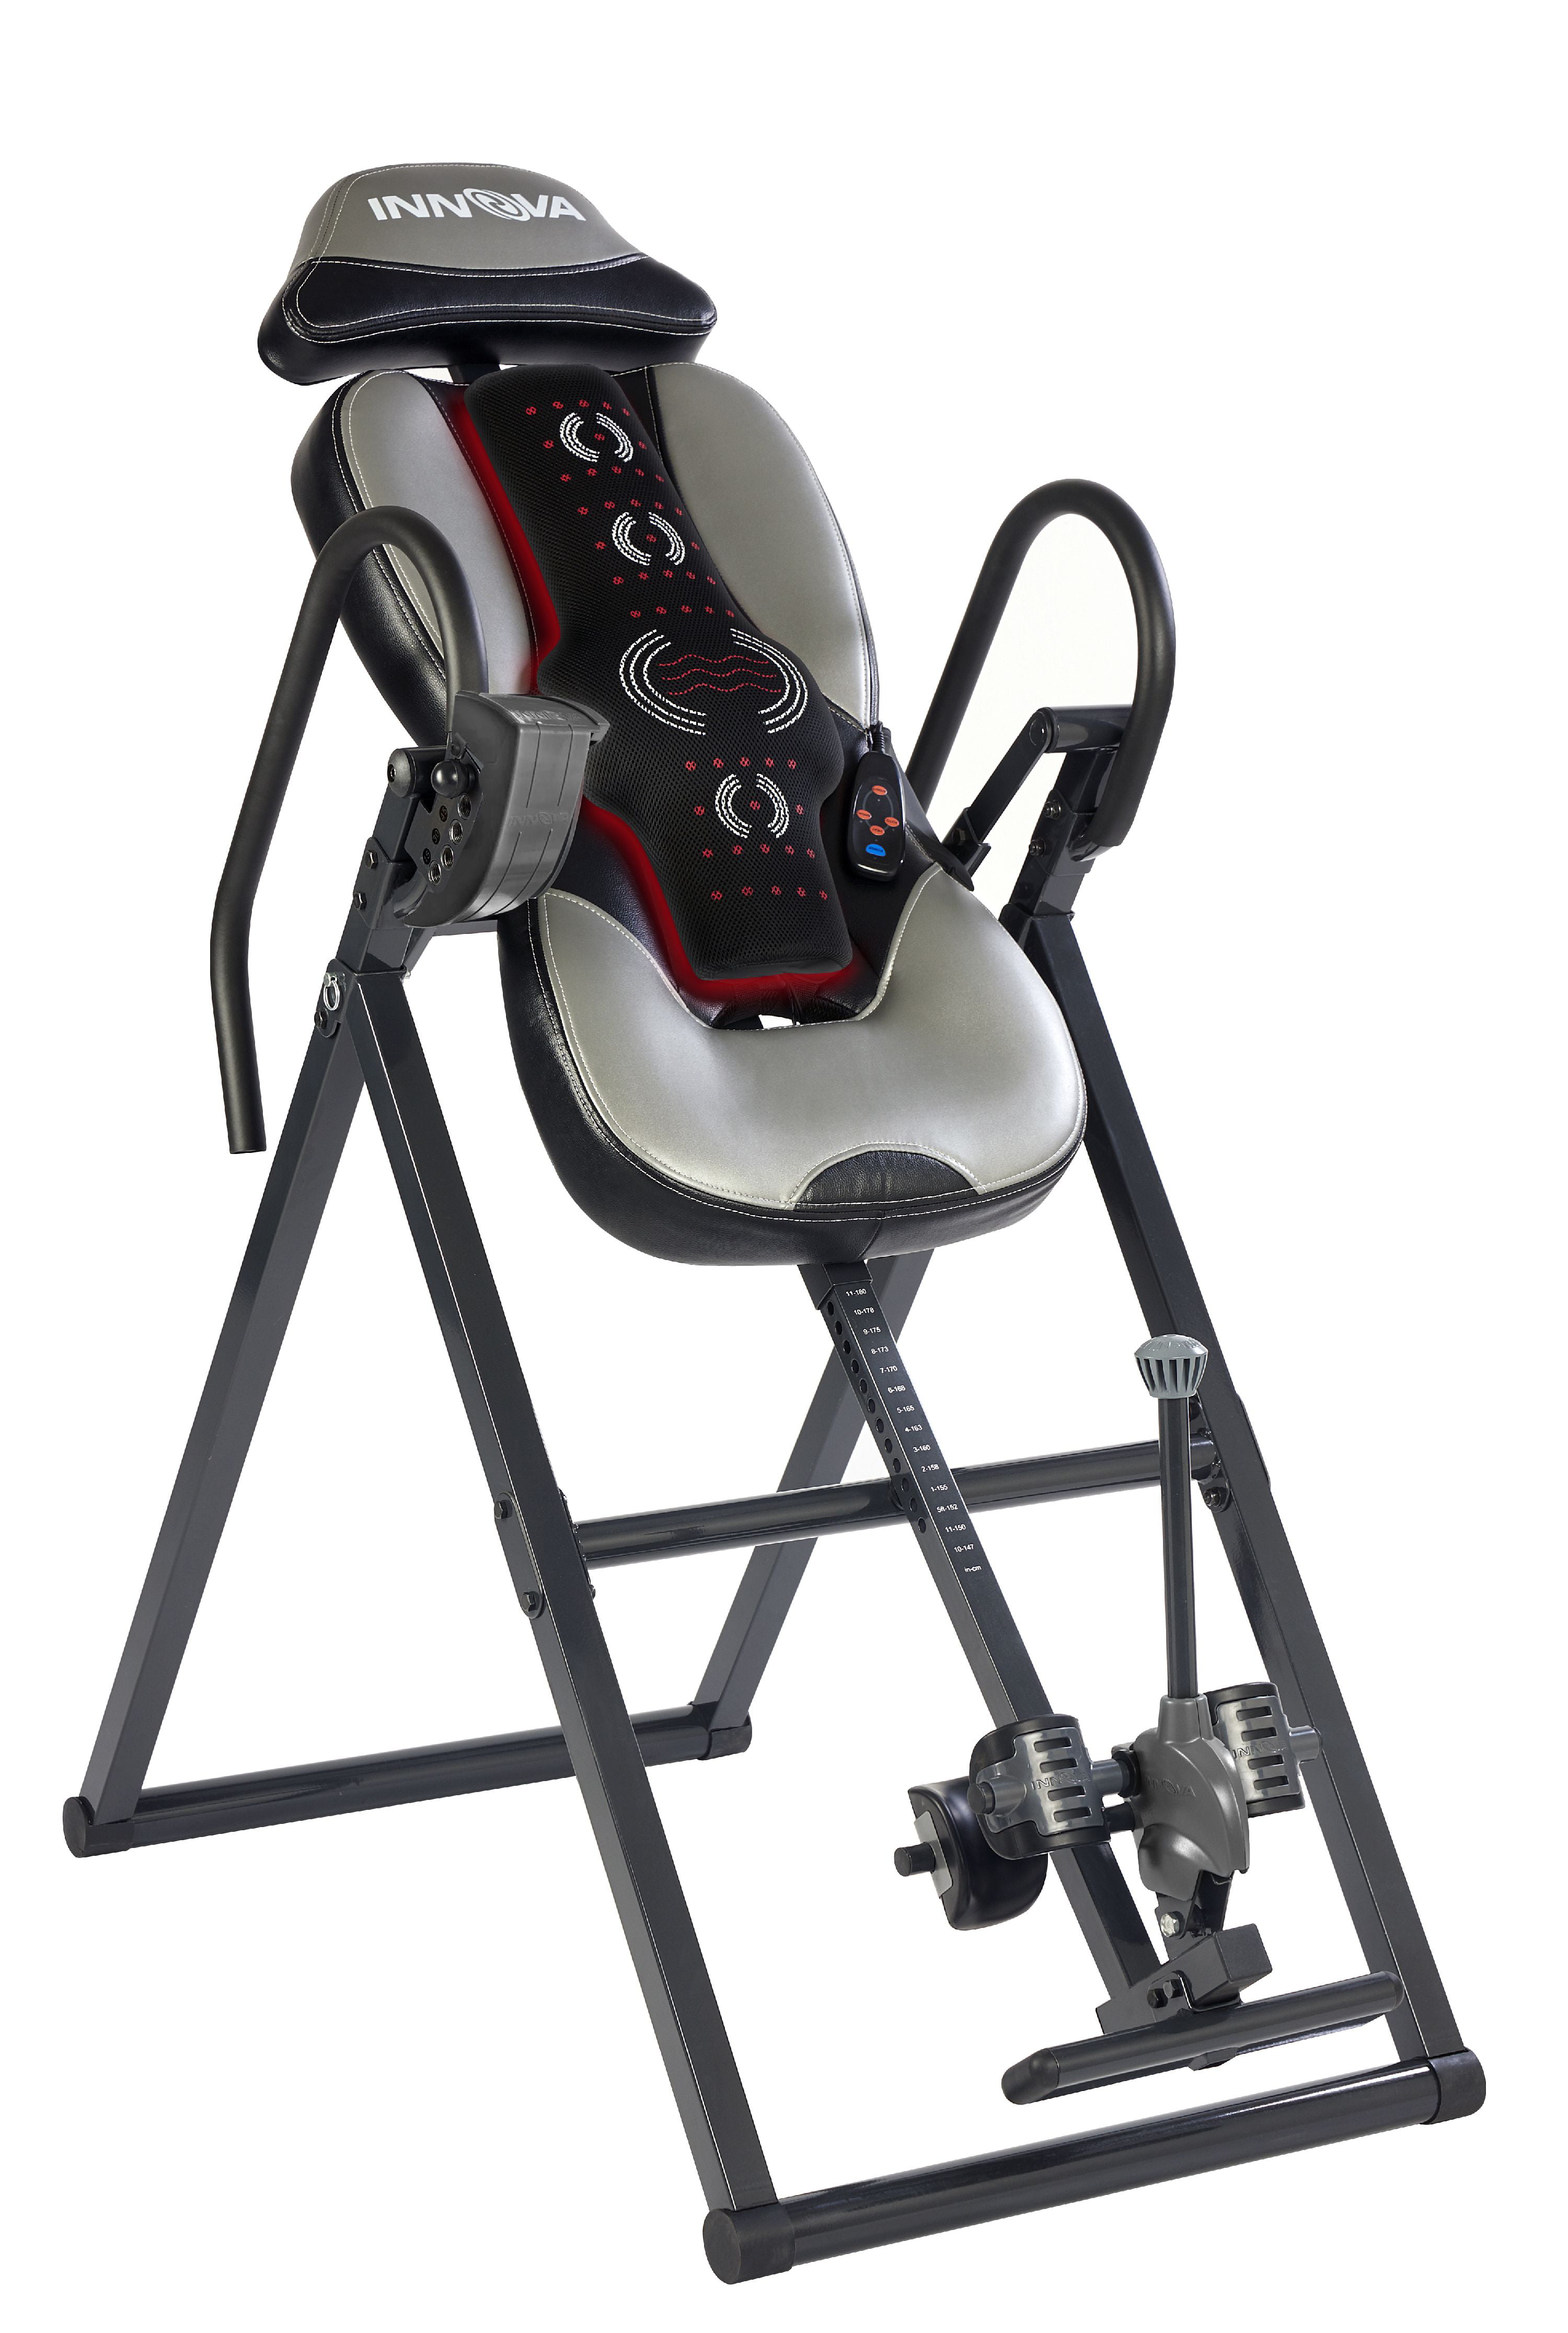 Details about   Health And Fitness ITM4800 Advanced Heat And Massage Therapeutic Inversion Table 